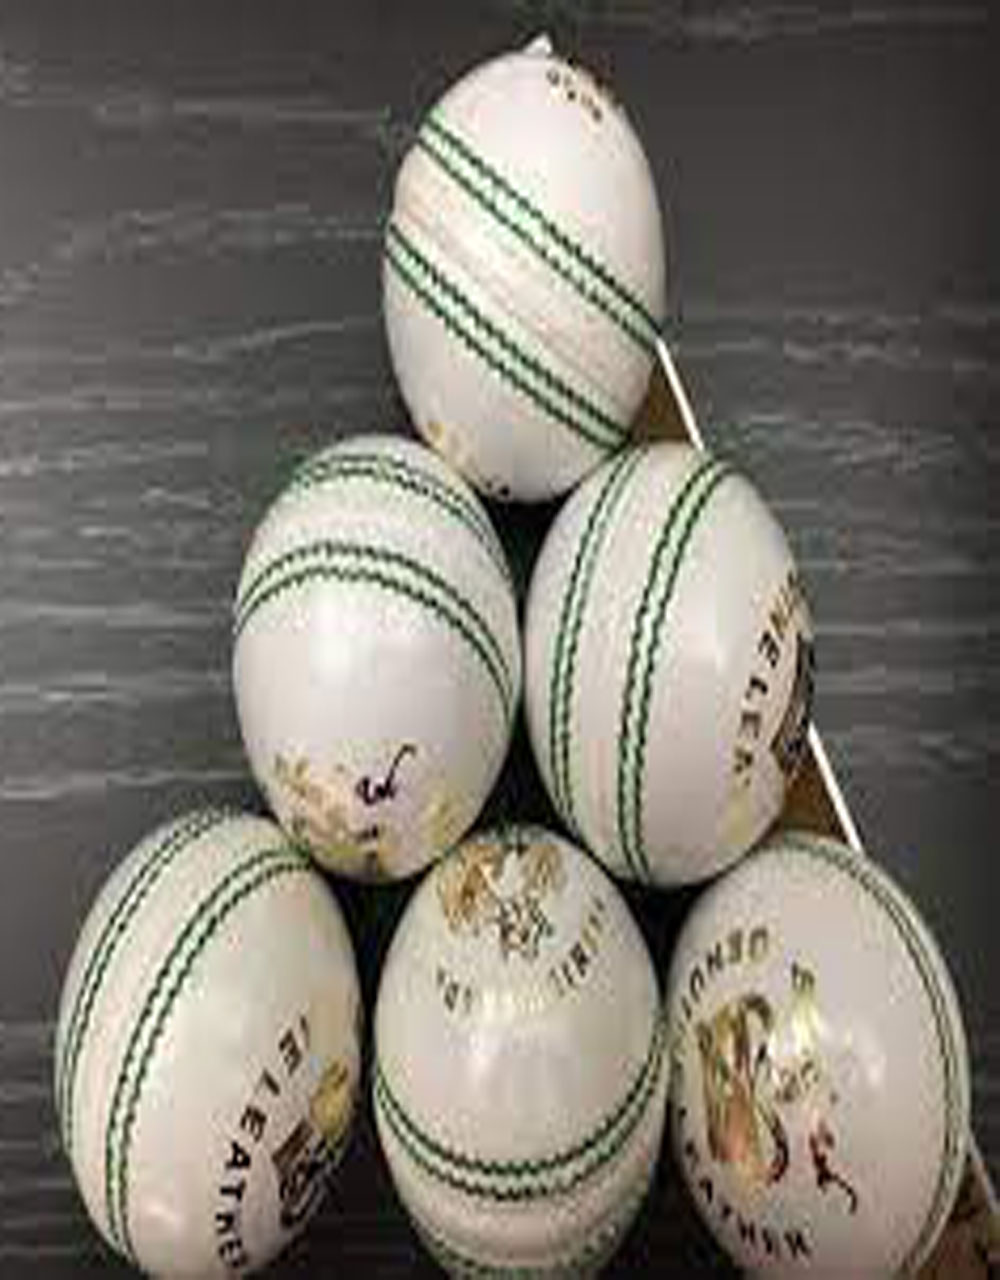 Cricket White Leather Ball